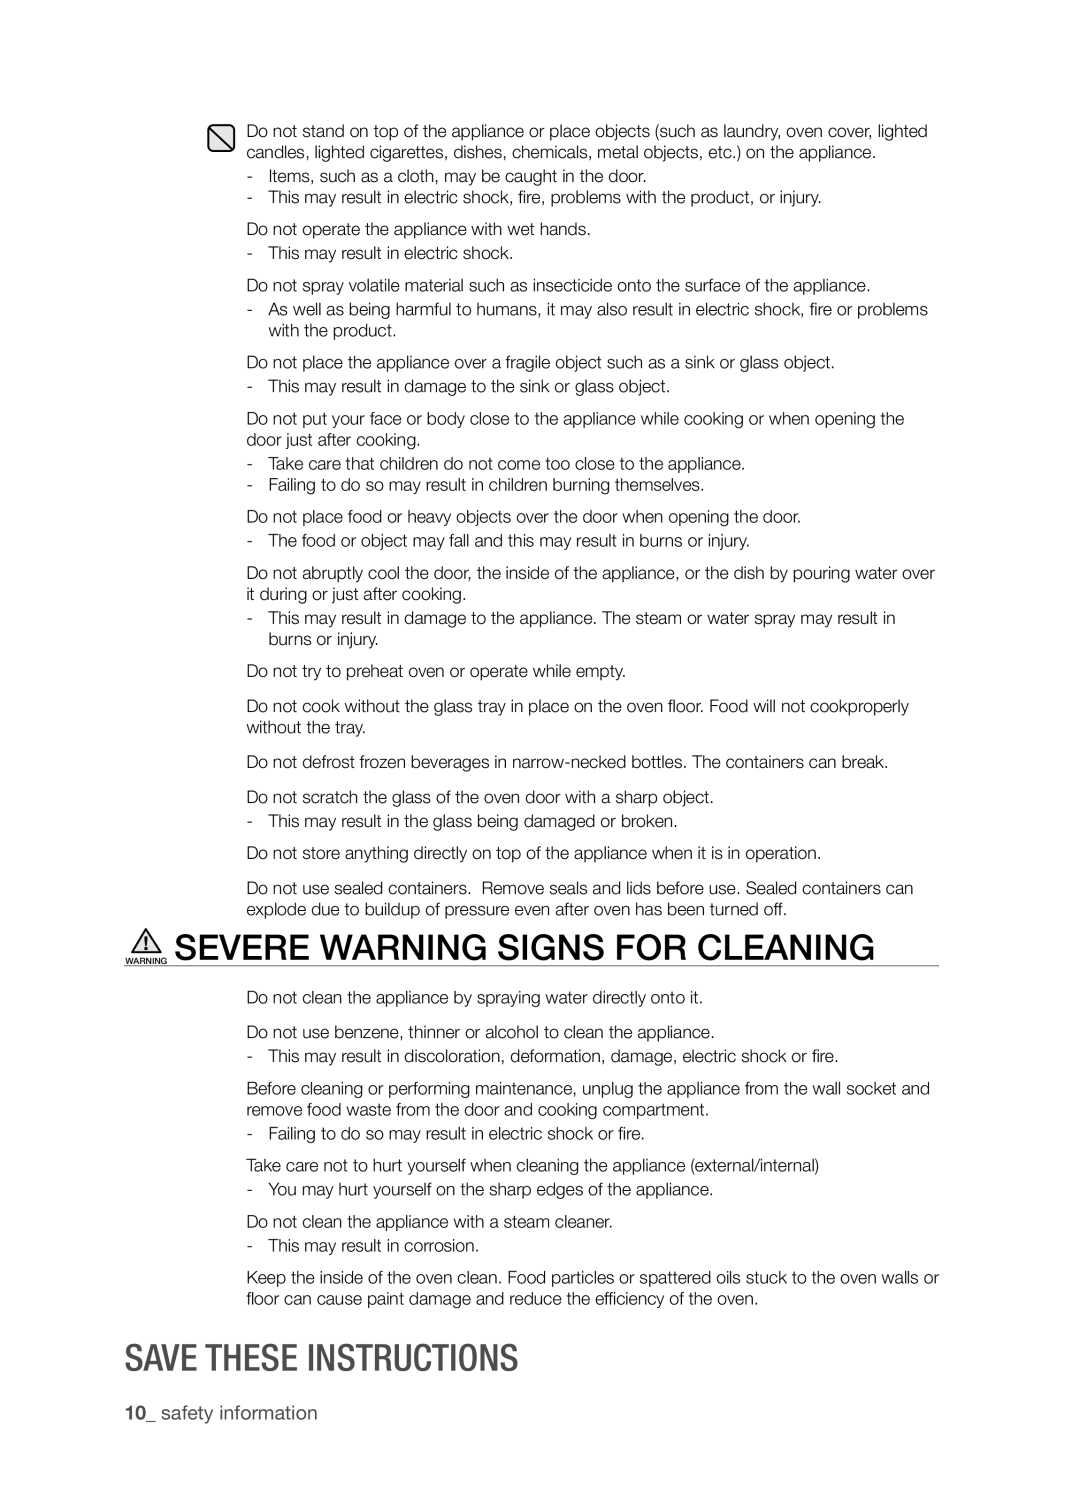 Samsung SMH9151B user manual Warning Severe Warning Signs For Cleaning, Save these instructions, safety information 